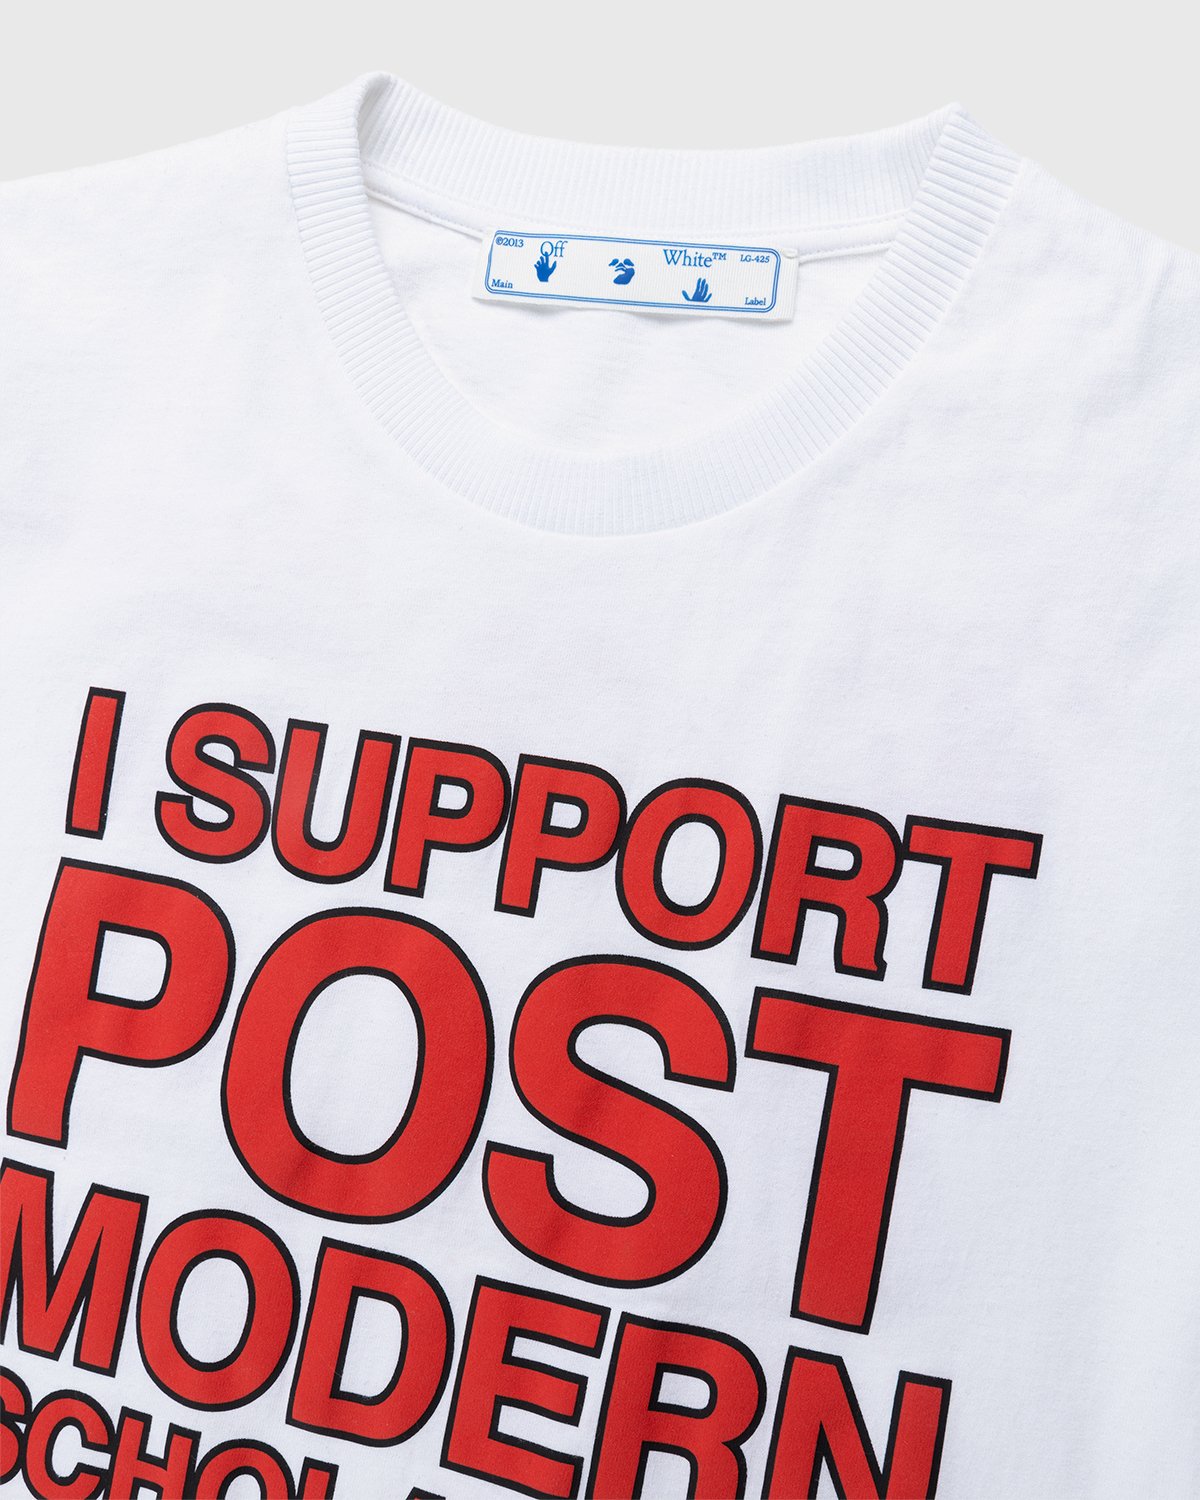 Off-White - Support Post-Modern Tee White/Red - Clothing - White - Image 4